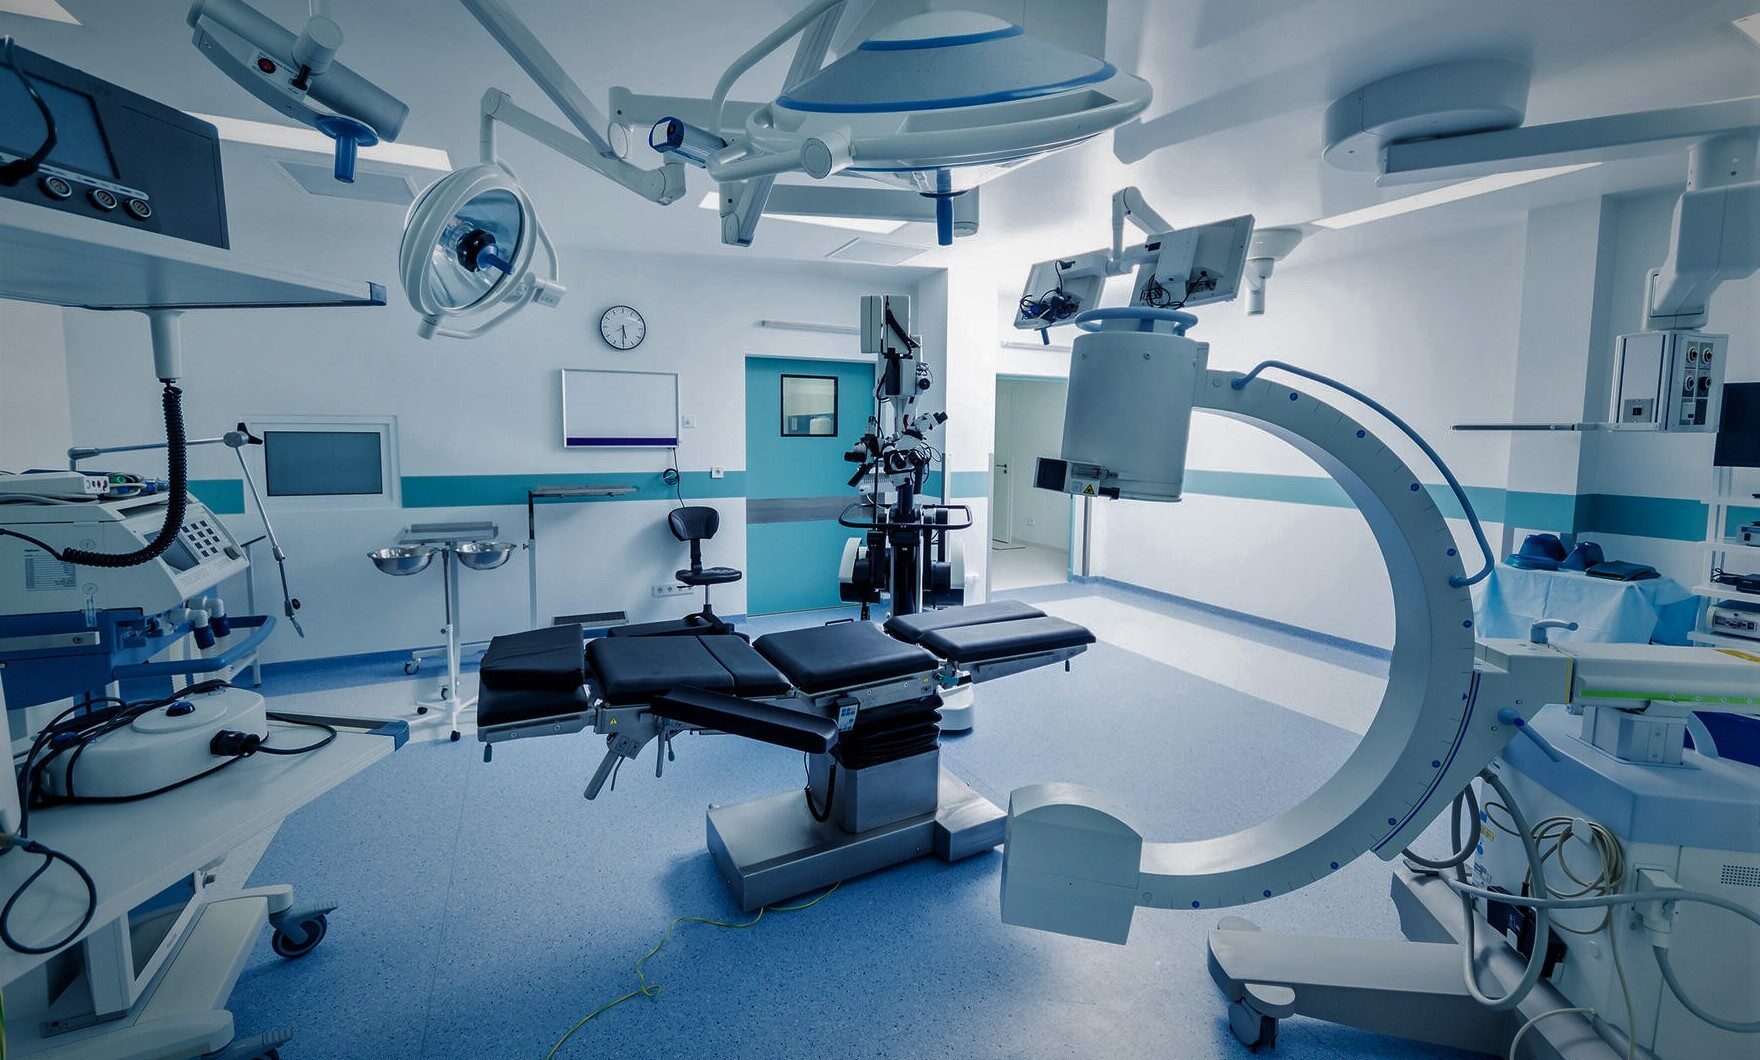 Refurbished Medical Equipment Market Size, Share, Growth, Trends & Demand by 2026